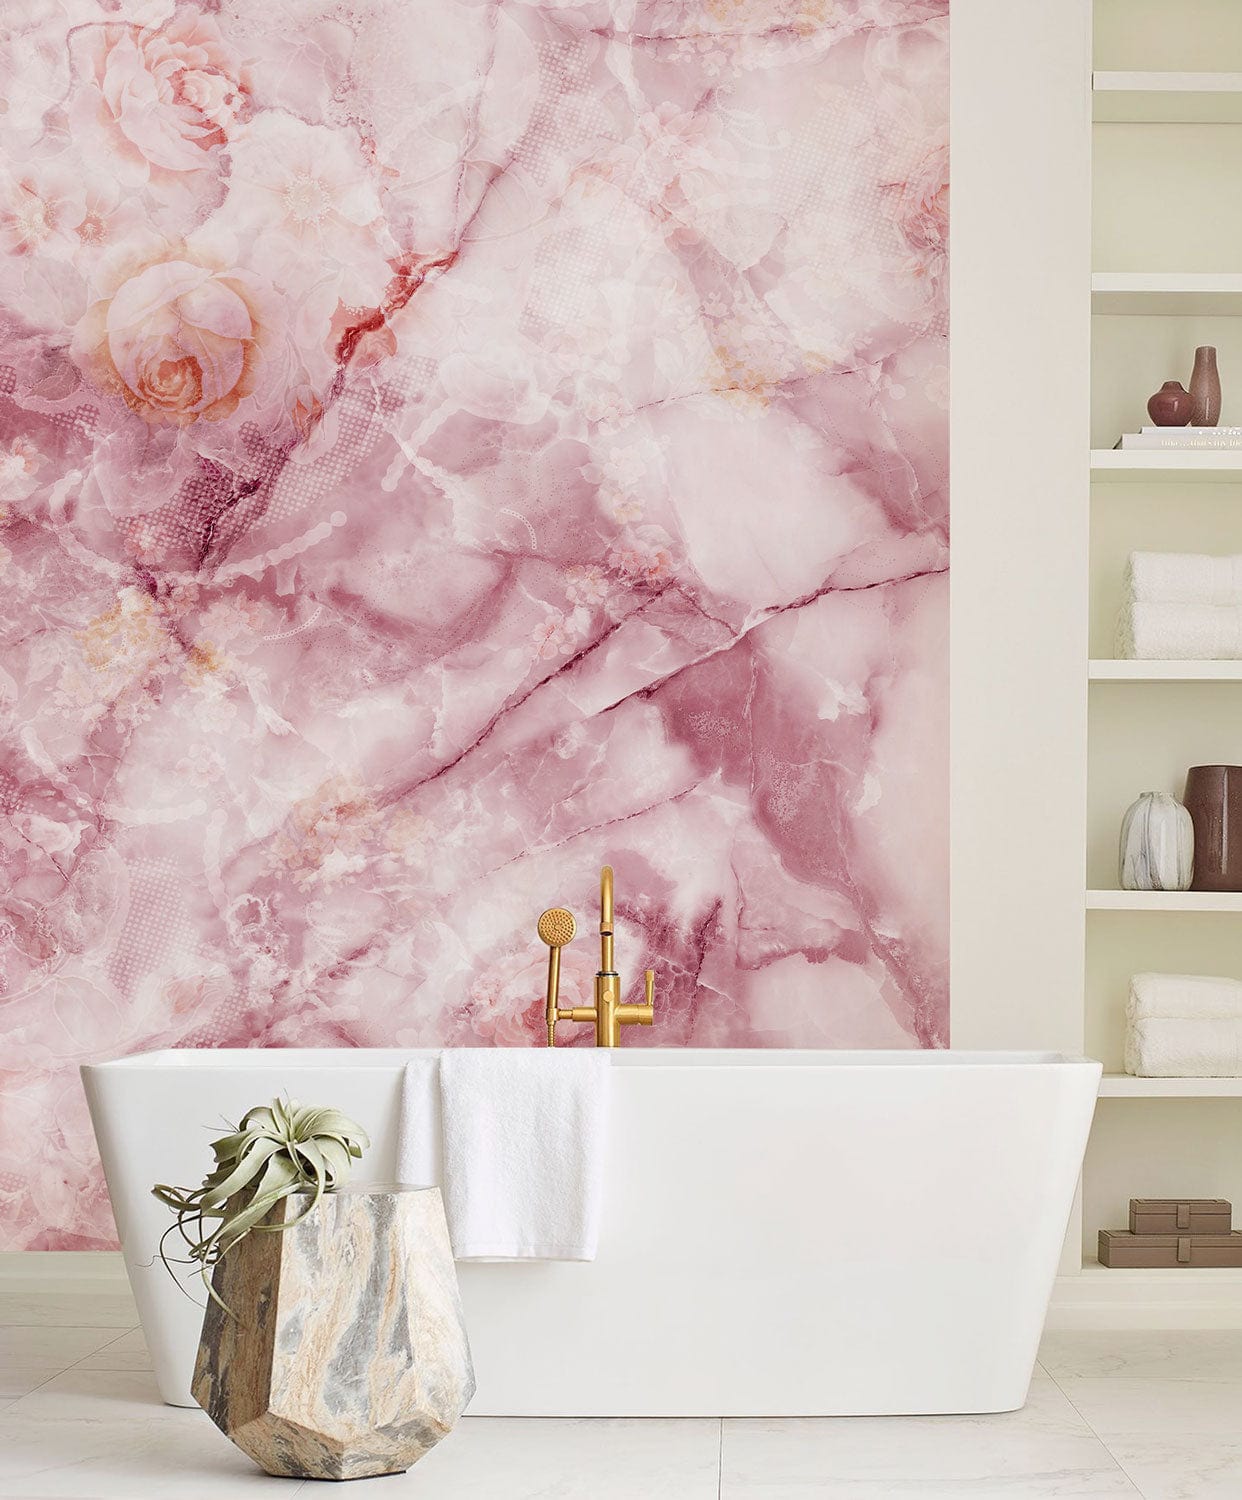 Cracked Rose Pink Crystal Wallpaper Mural for Use as Decoration in Bathrooms